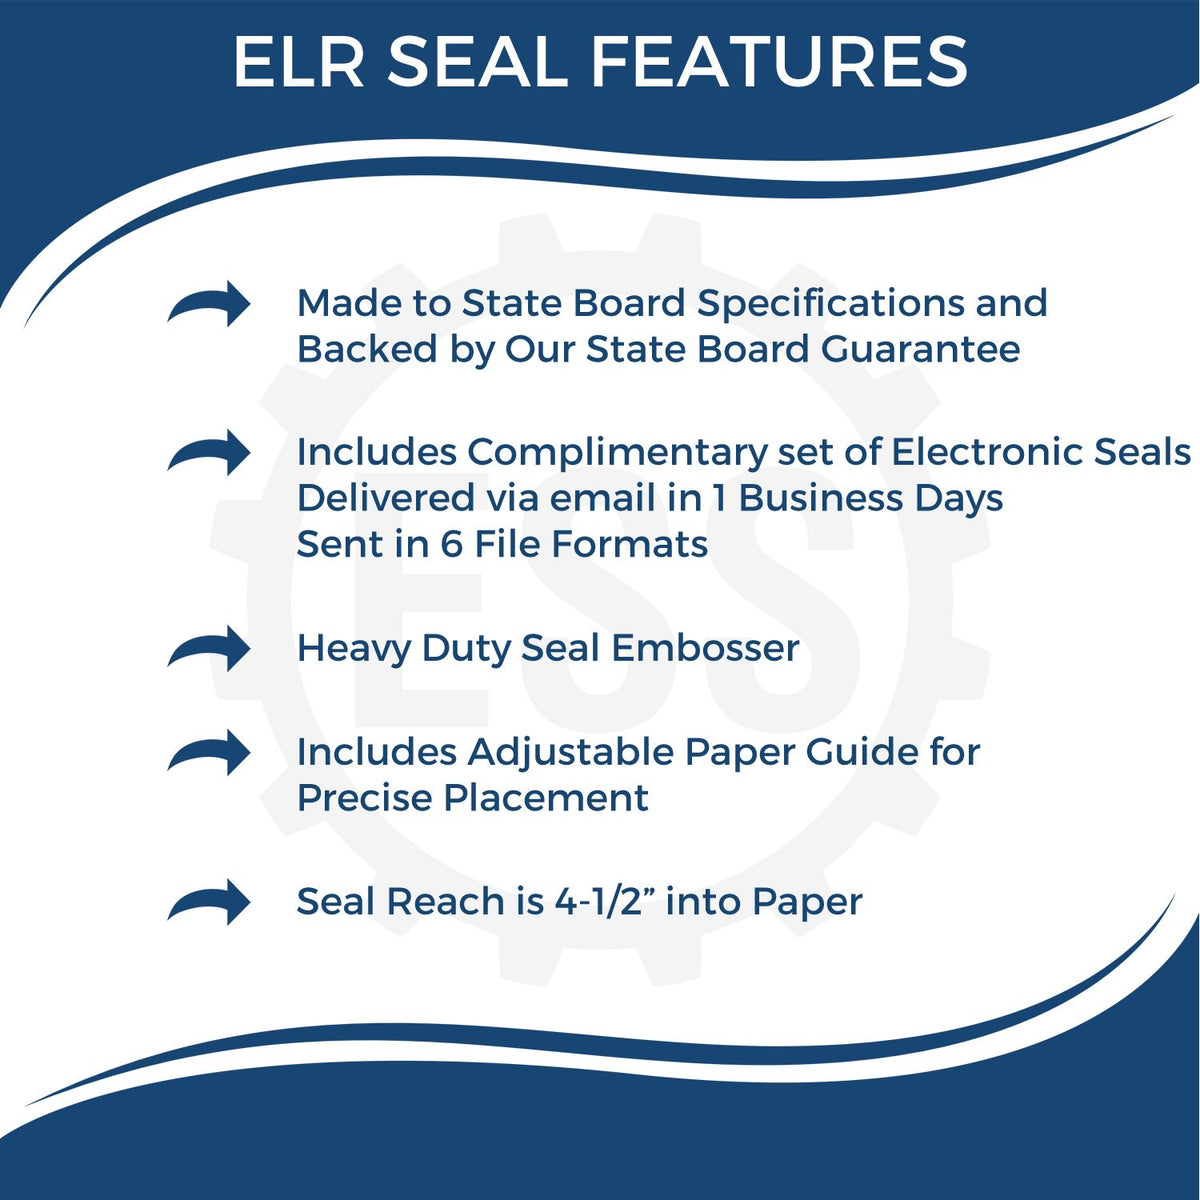 A picture of an infographic highlighting the selling points for the Extended Long Reach Maine Architect Seal Embosser